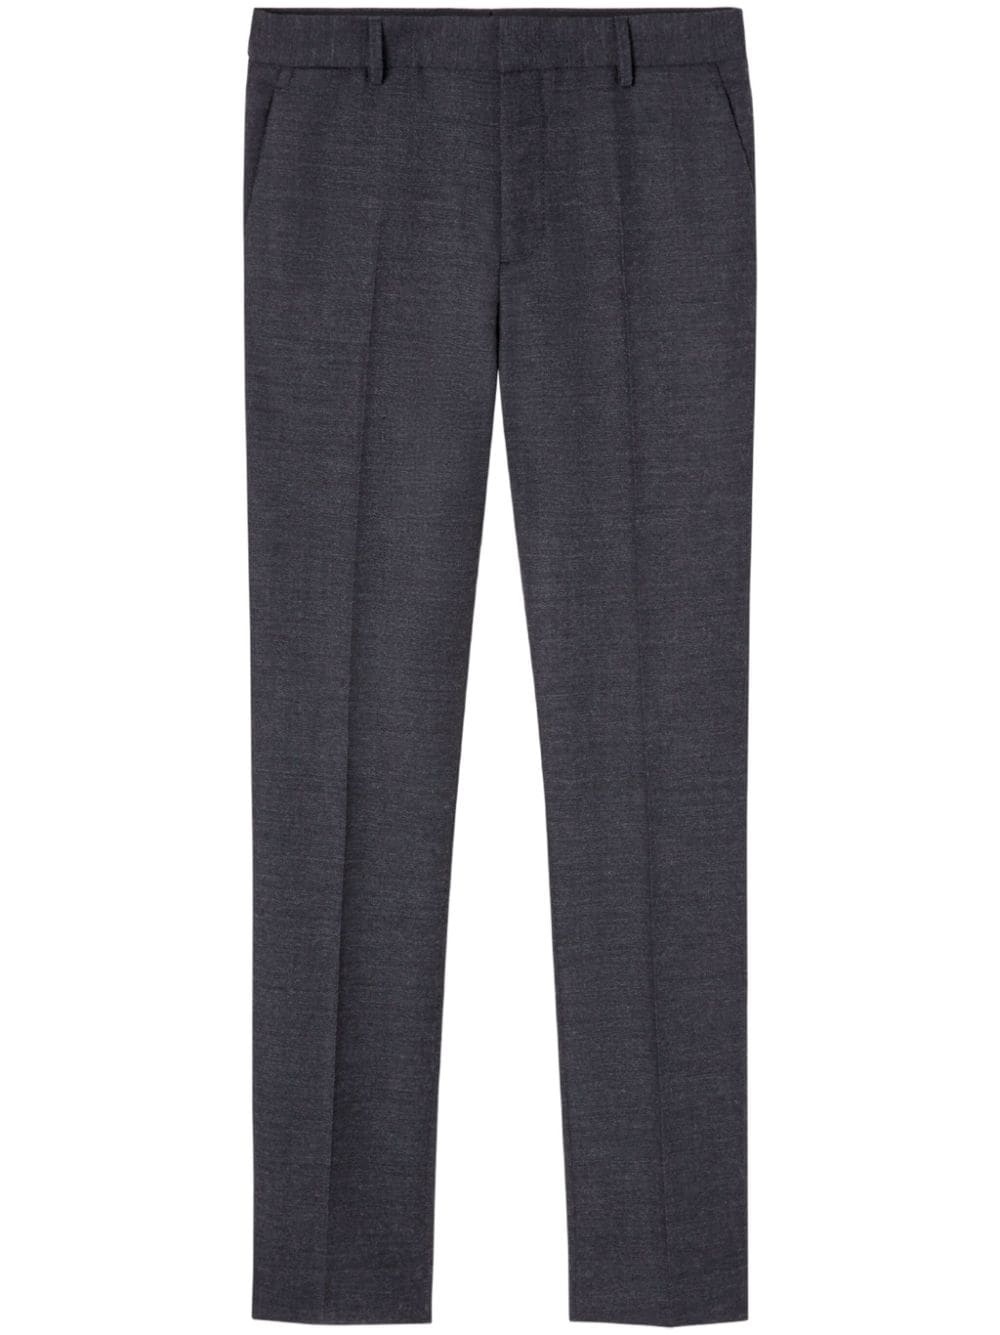 pressed-crease cotton tailored trousers - 1